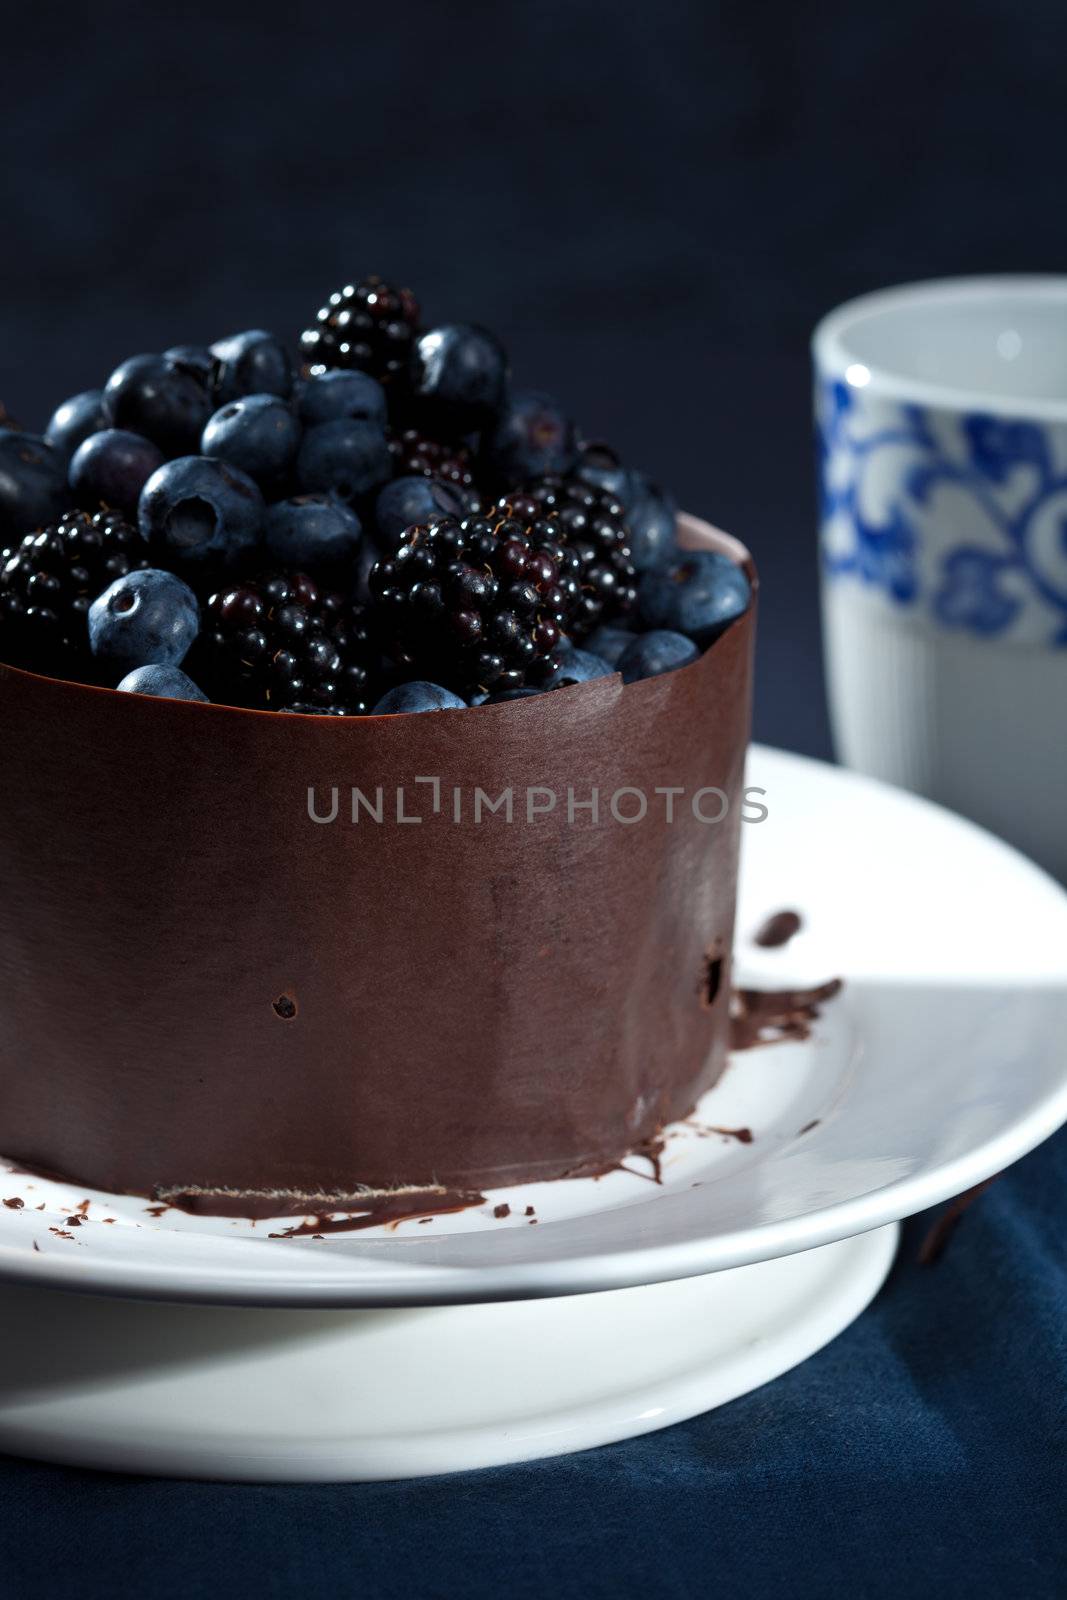 Gorgeous chocolate cake with blueberries and blackberries by Fotosmurf